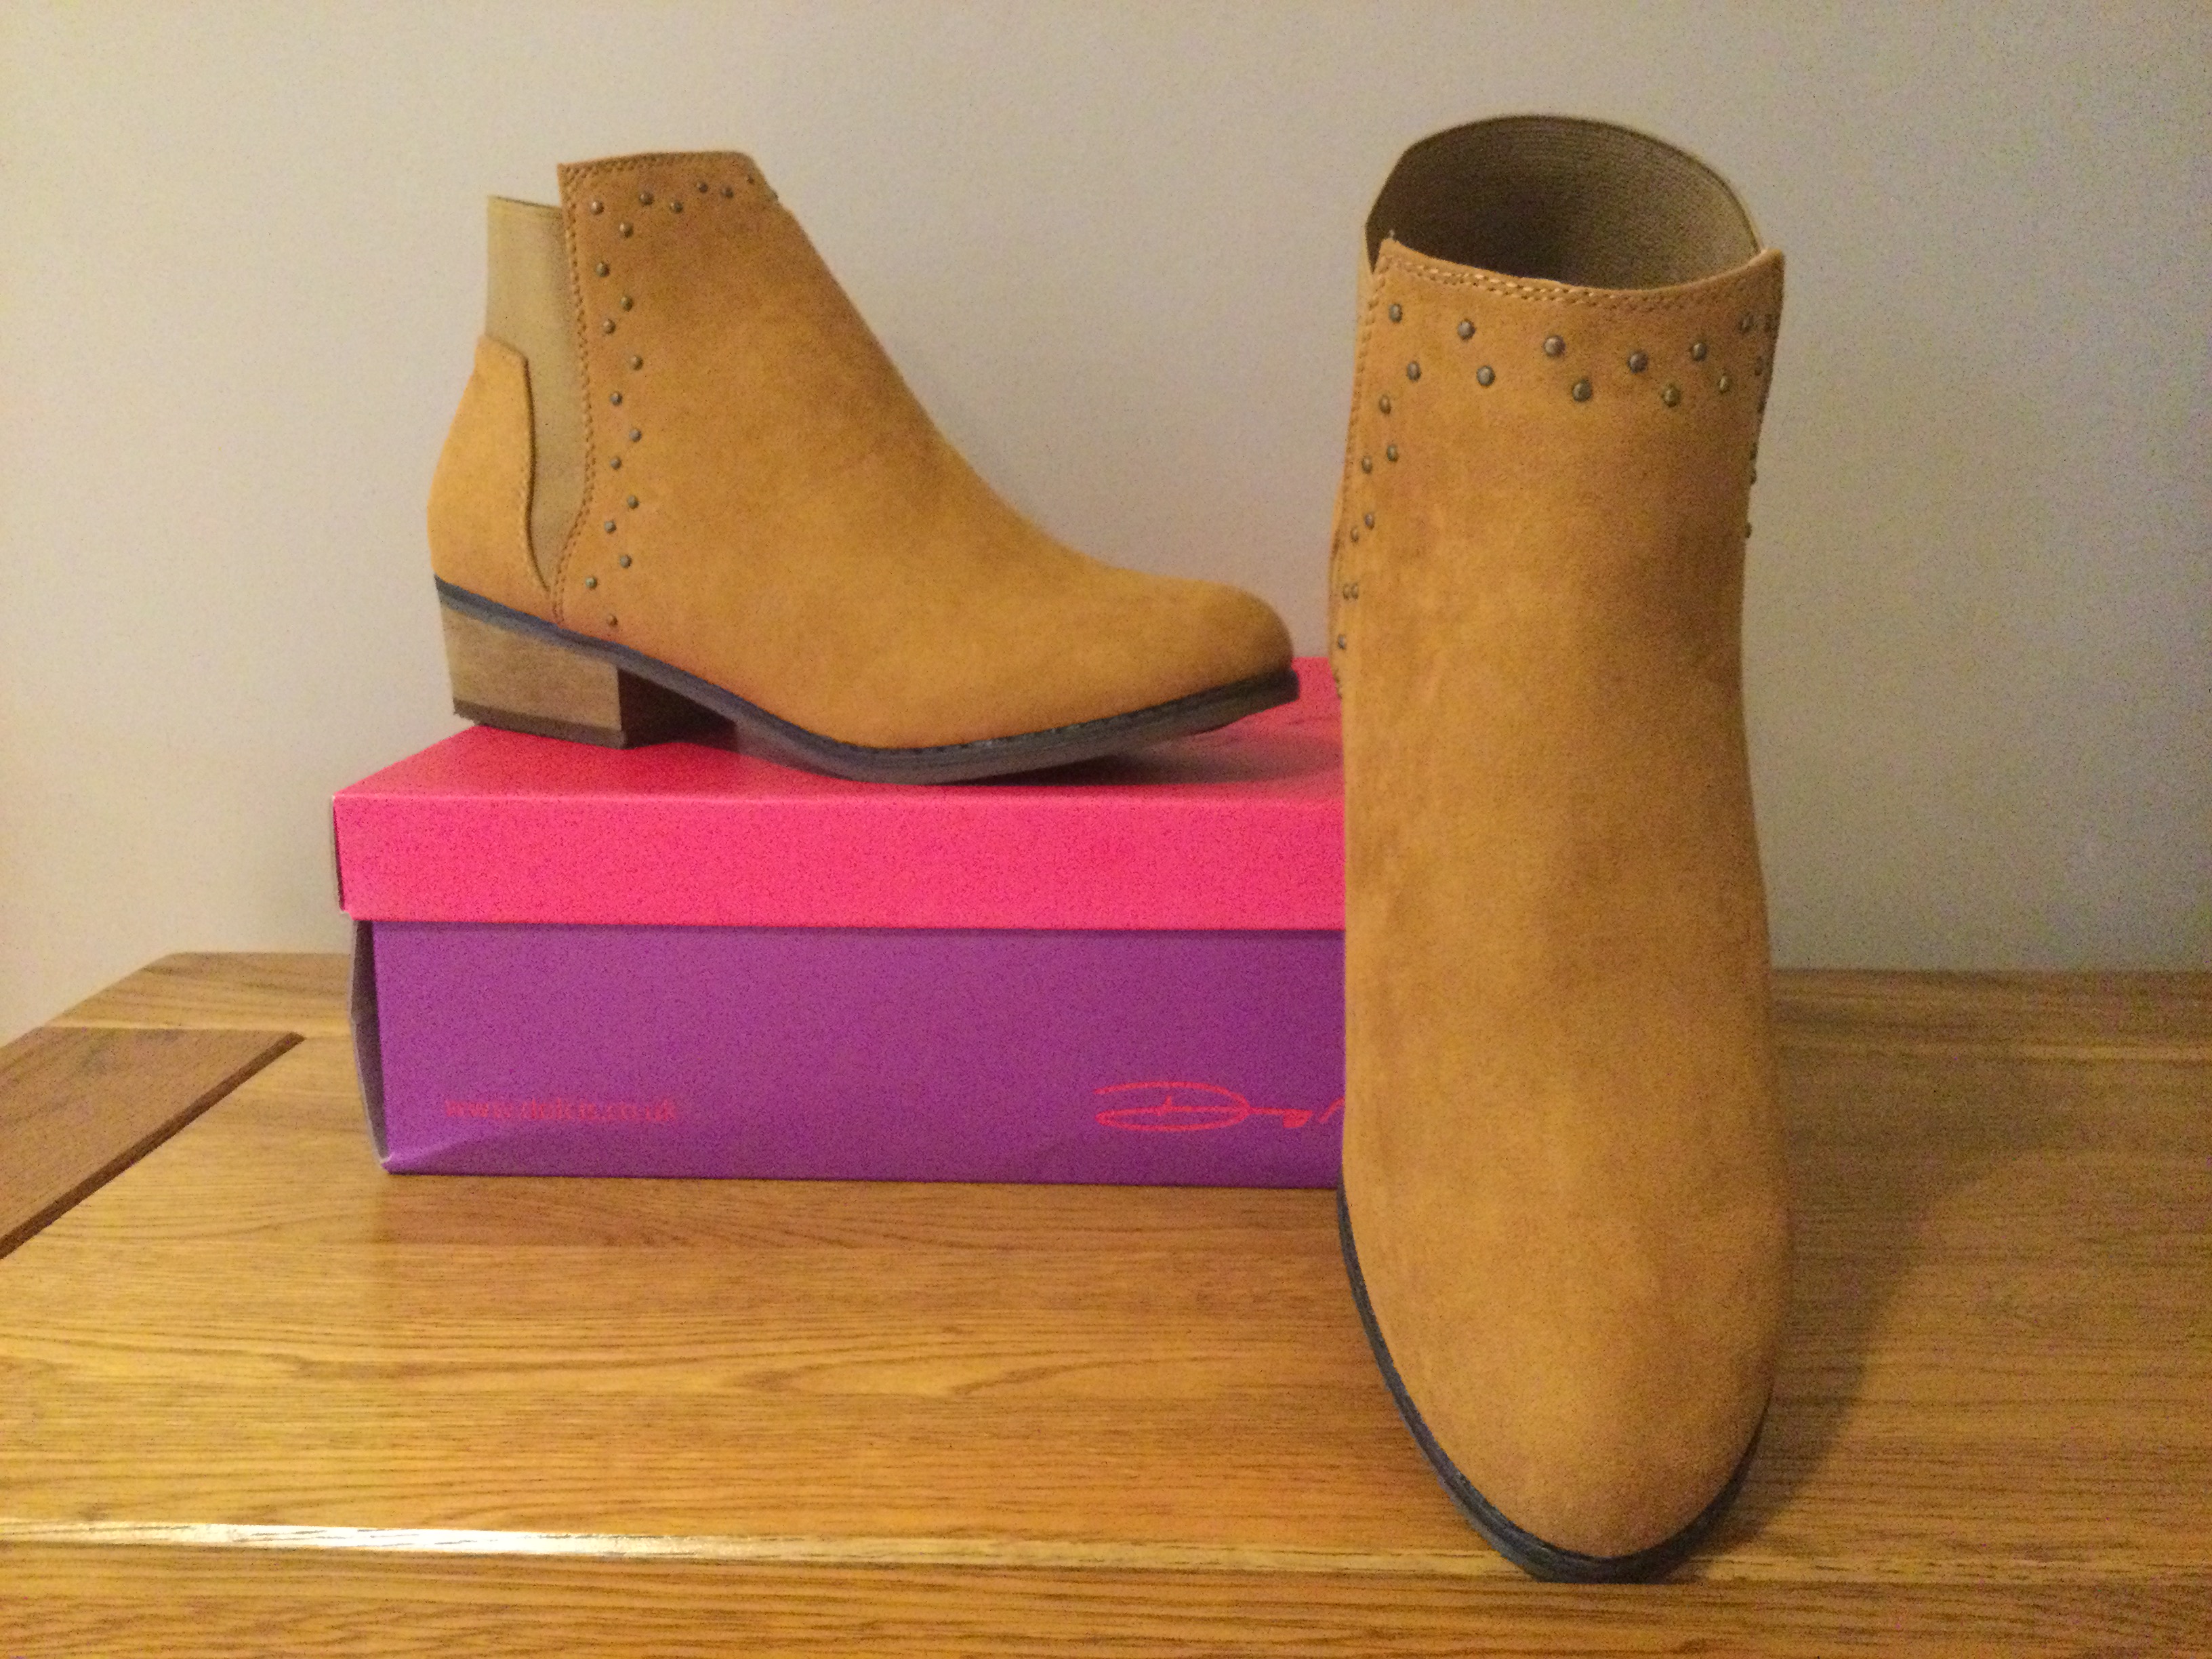 Dolcis “Wendy” Ankle Boots, Size 4, Tan - New RRP £45.00 - Image 4 of 6